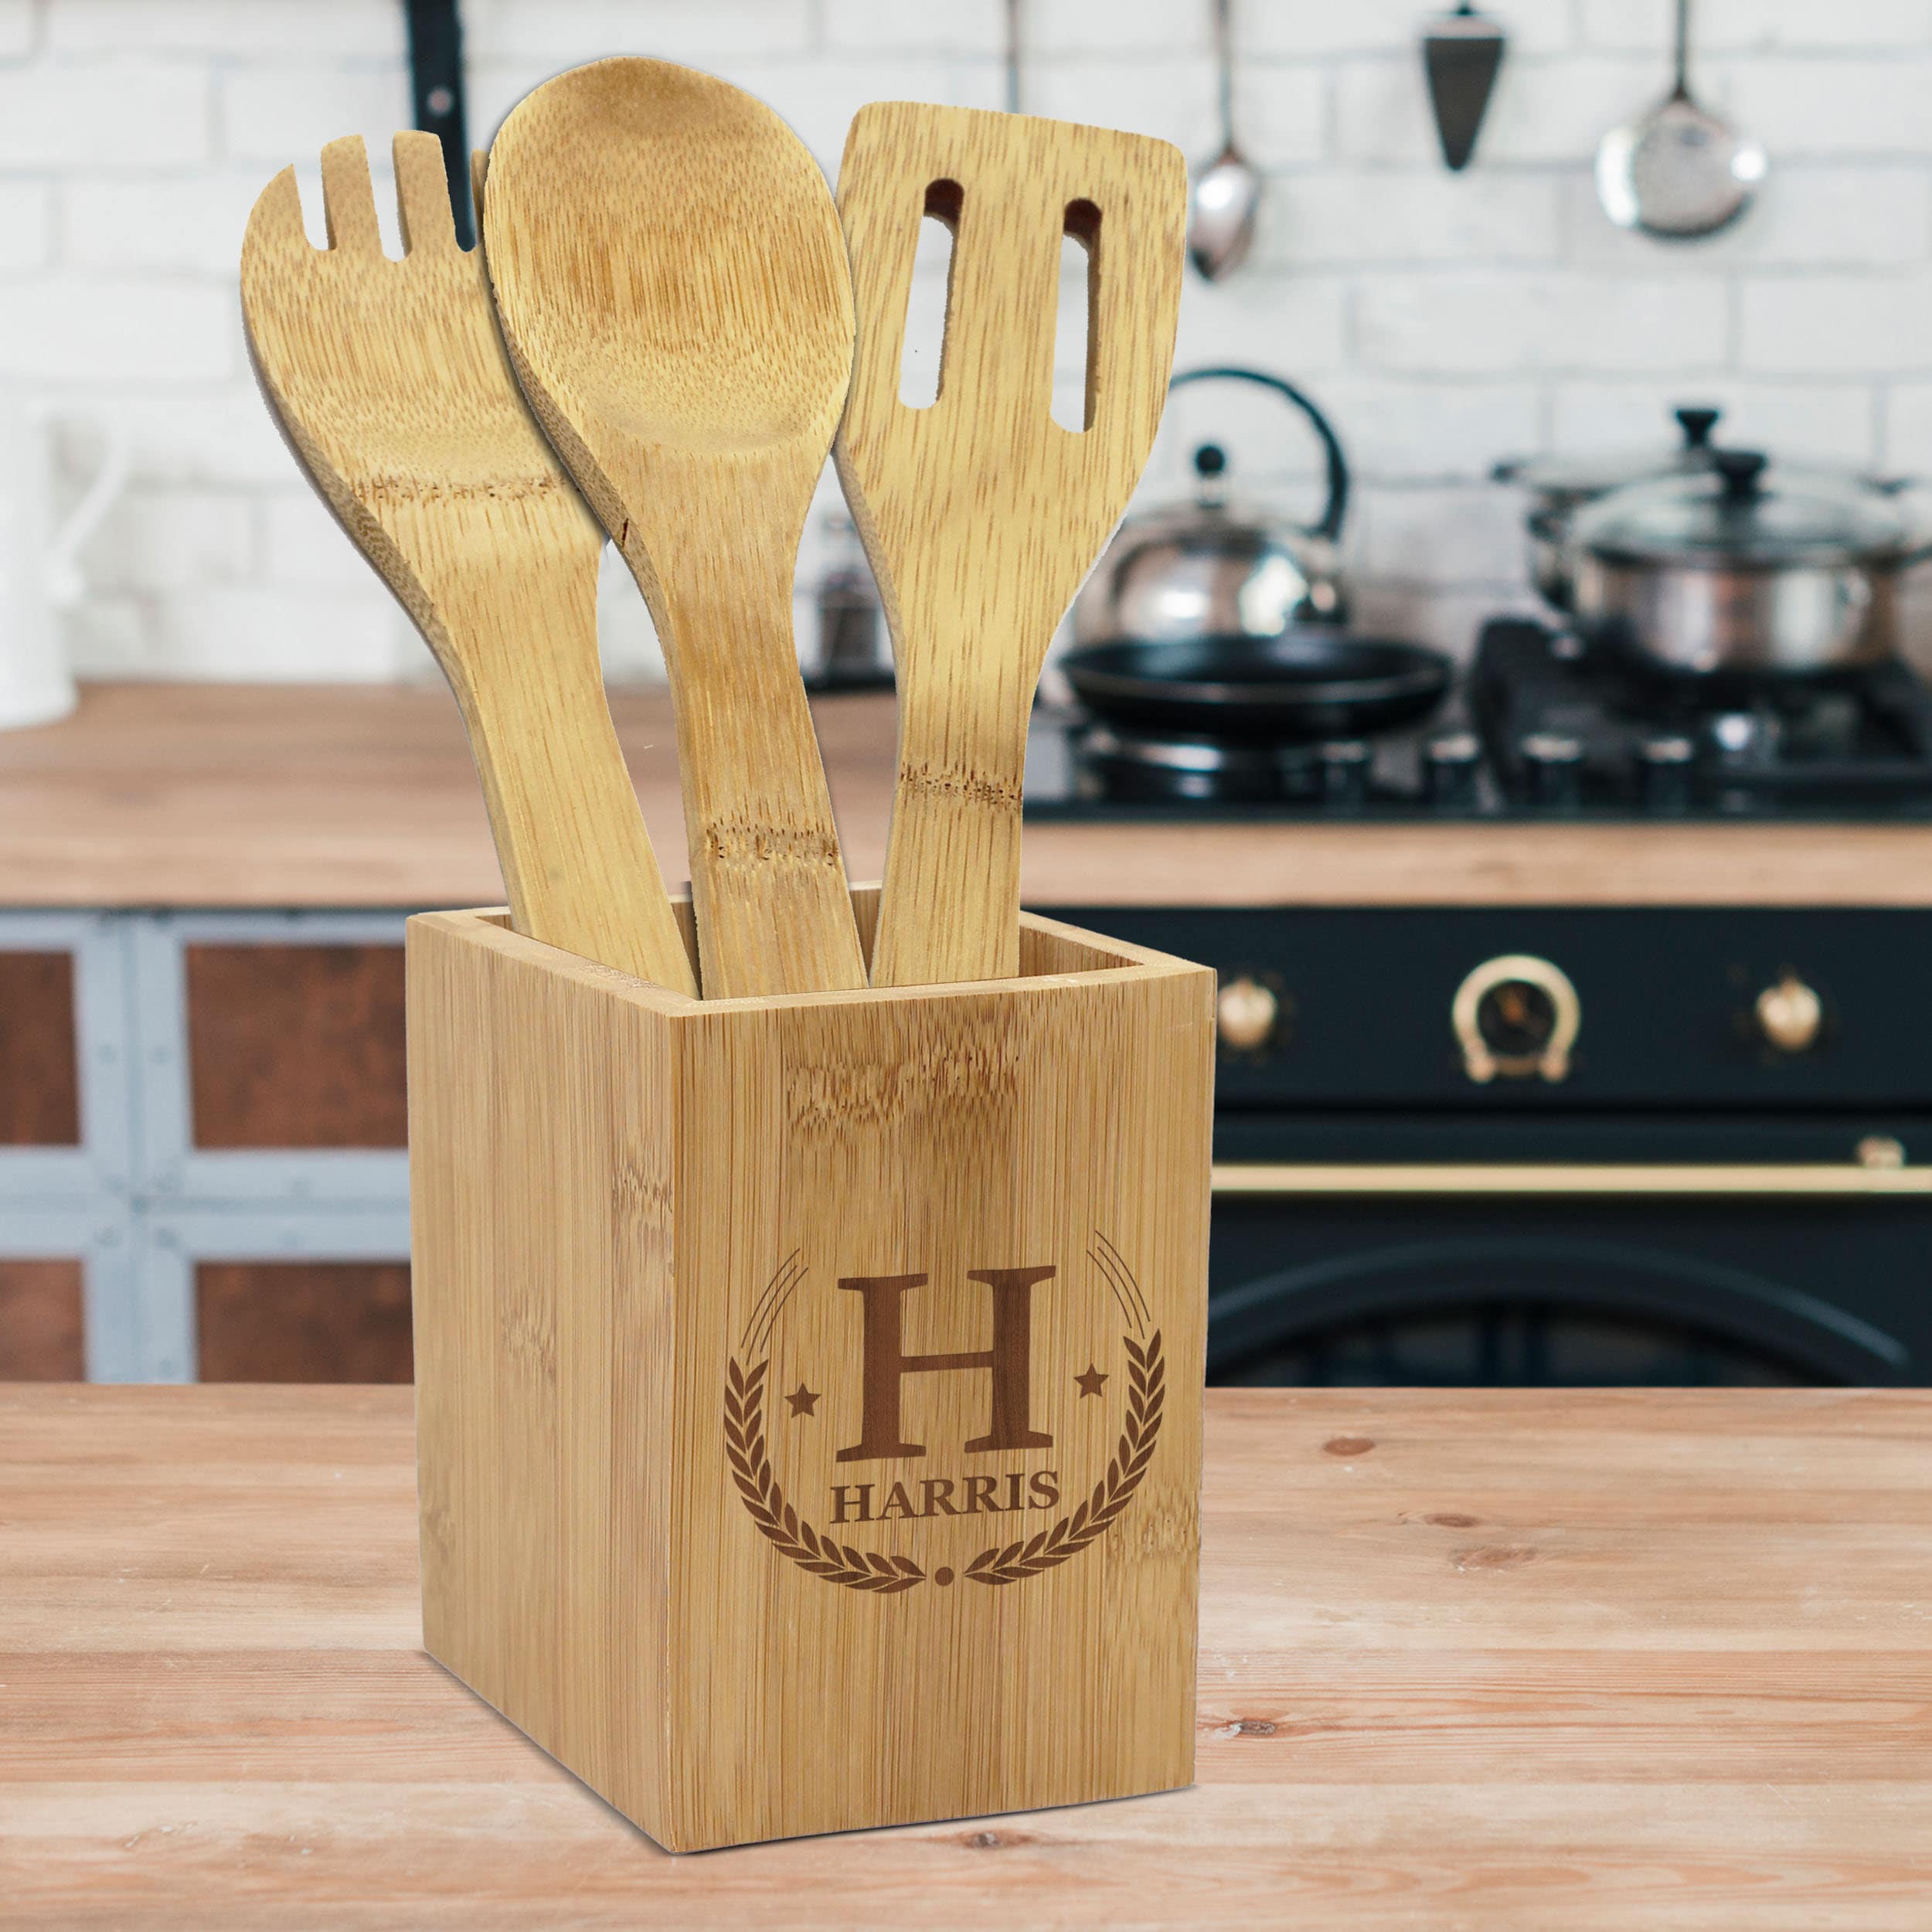 Personalized Kitchen Tool Holder